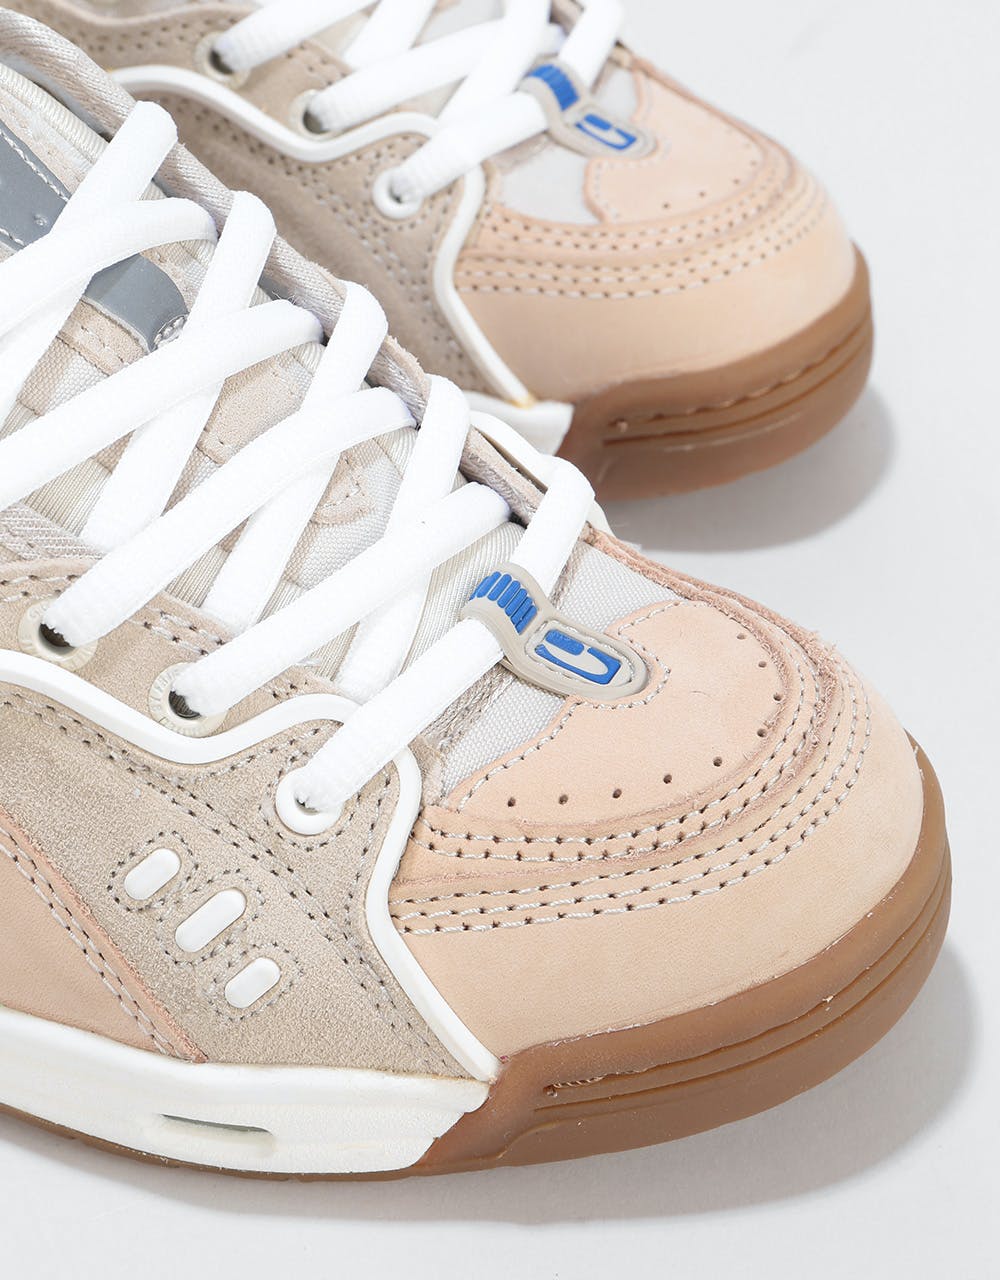 Globe CT IV Classic Womens Trainers - Oyster Grey/Gum